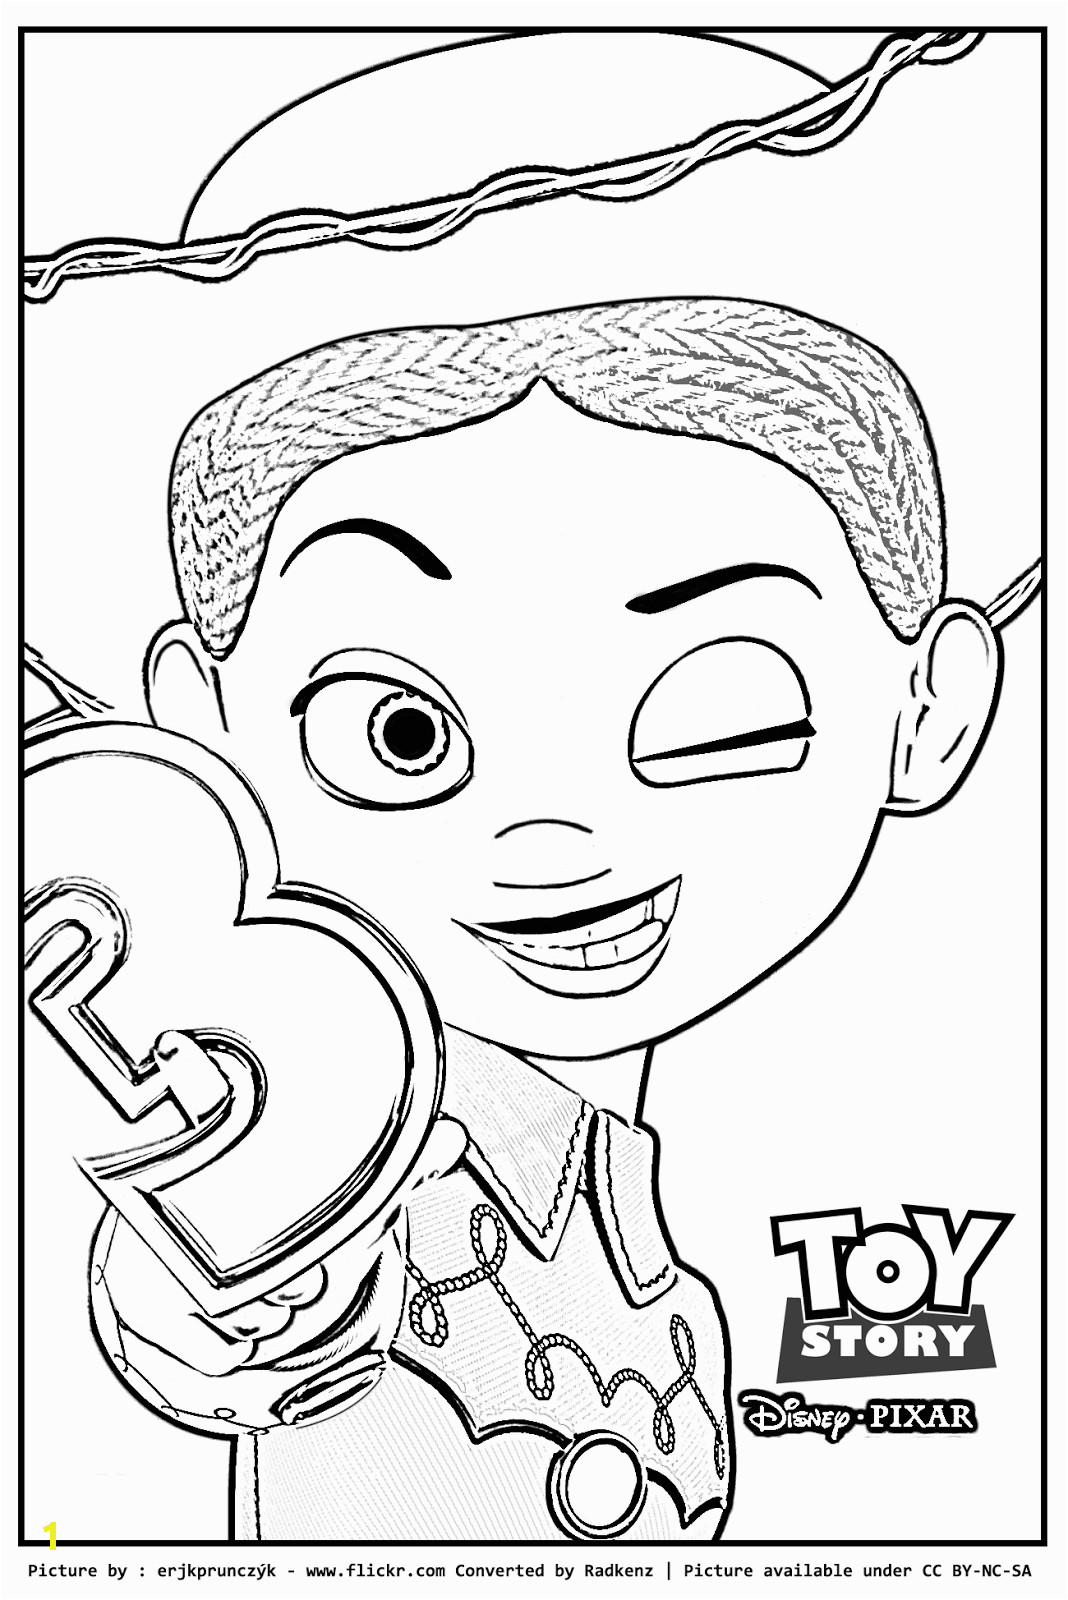 jessie toy story coloring page